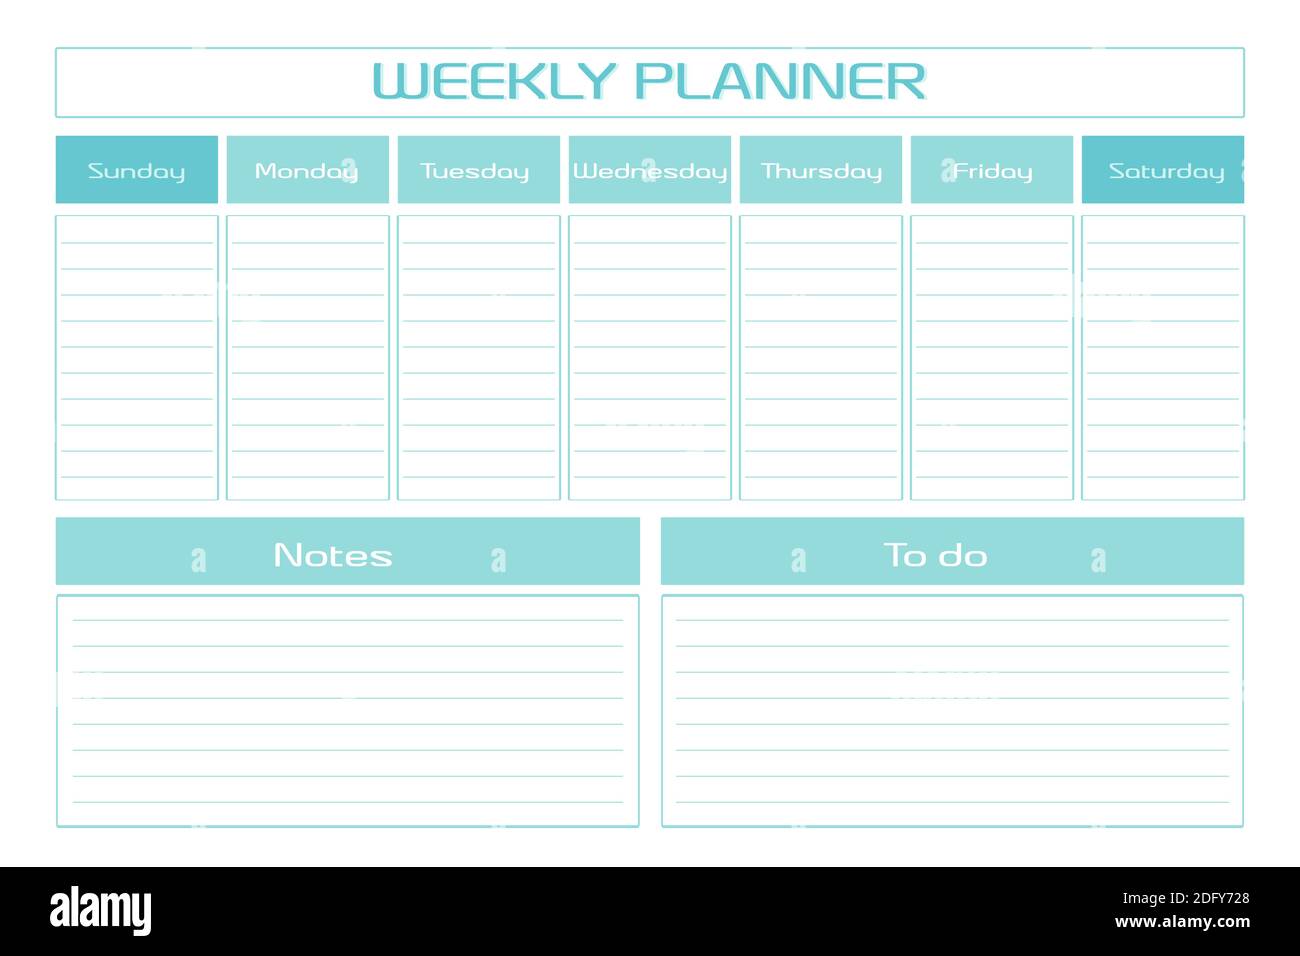 Weekly planner diary turquoise template. seven days personal schedule in a minimalist design. Week starts on sunday. Stock Vector